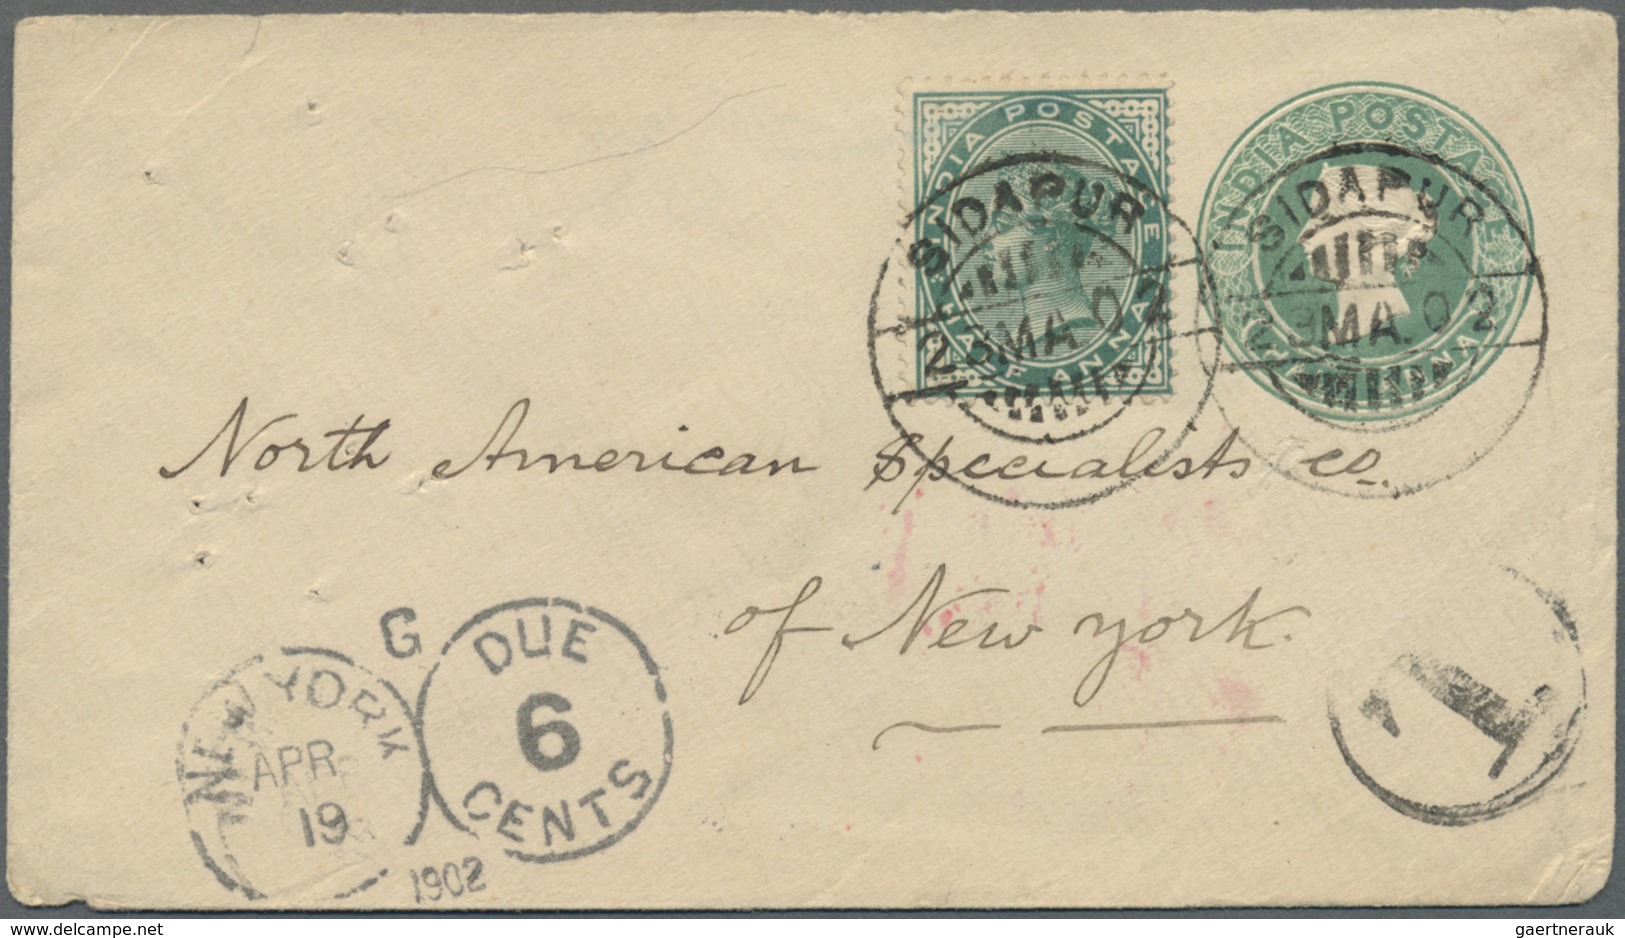 Br/GA Indien: 1887-1902: Four covers and postal stationery items from India to the U.S.A. and one cover (1